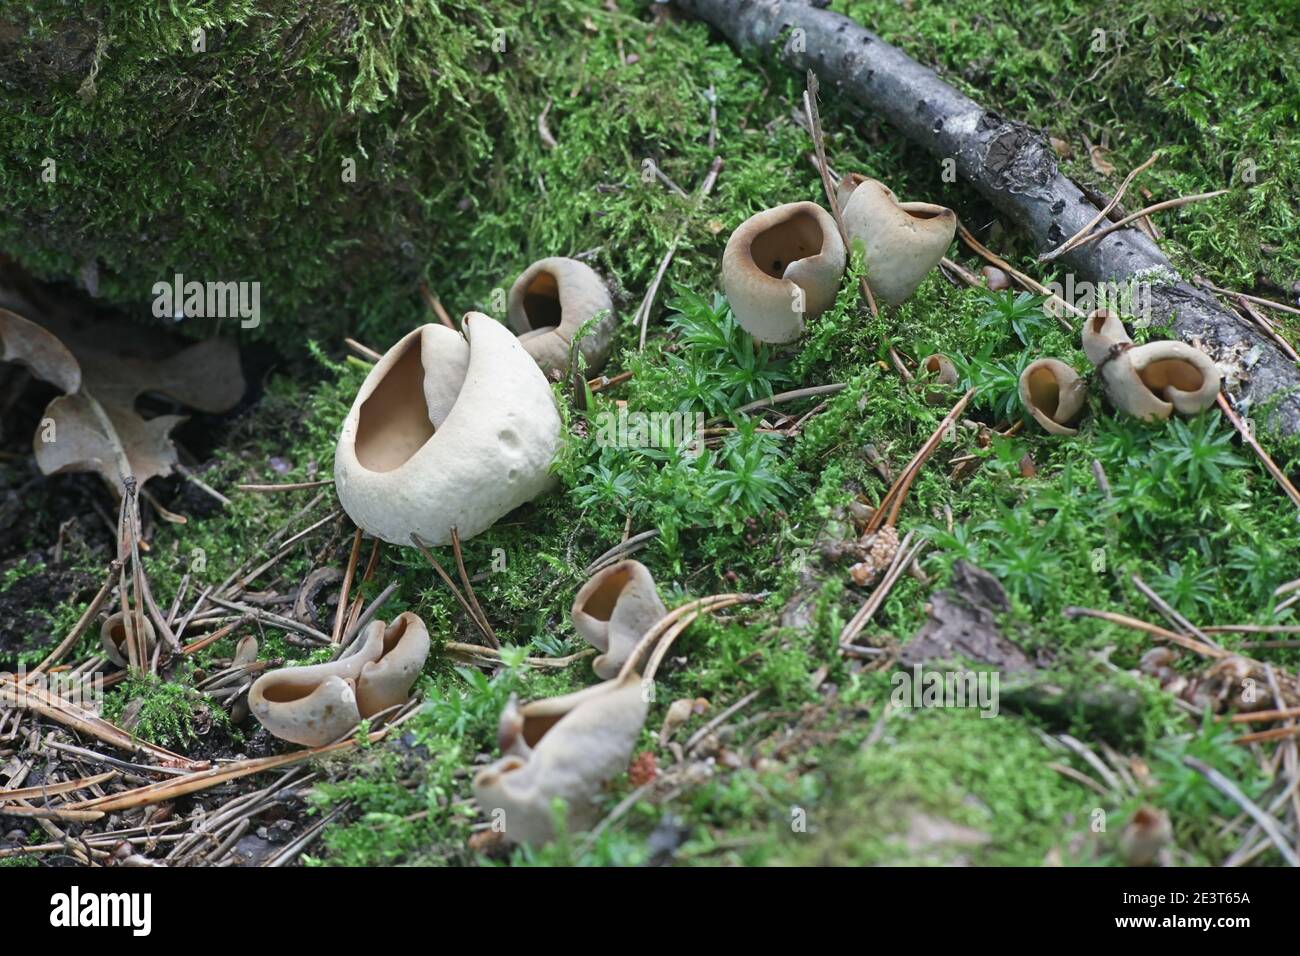 Otidea alutacea, a cup fungus from Finland with no common english name Stock Photo